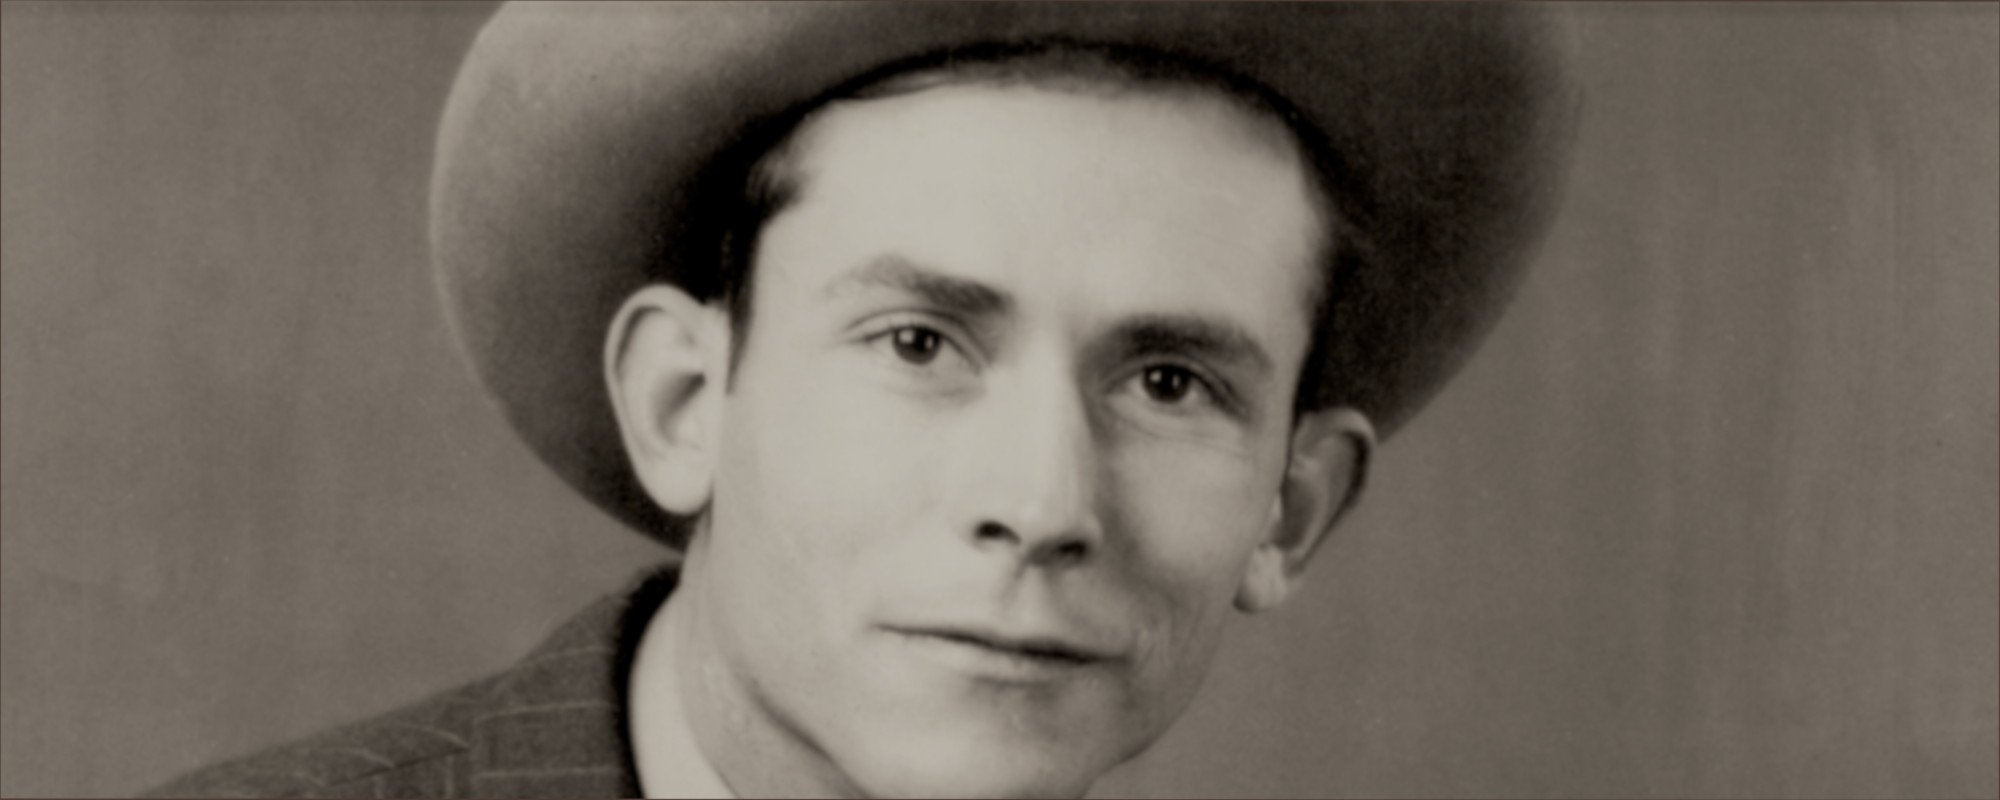 The Larger-Than Life Legacy of the Hank Williams' Family